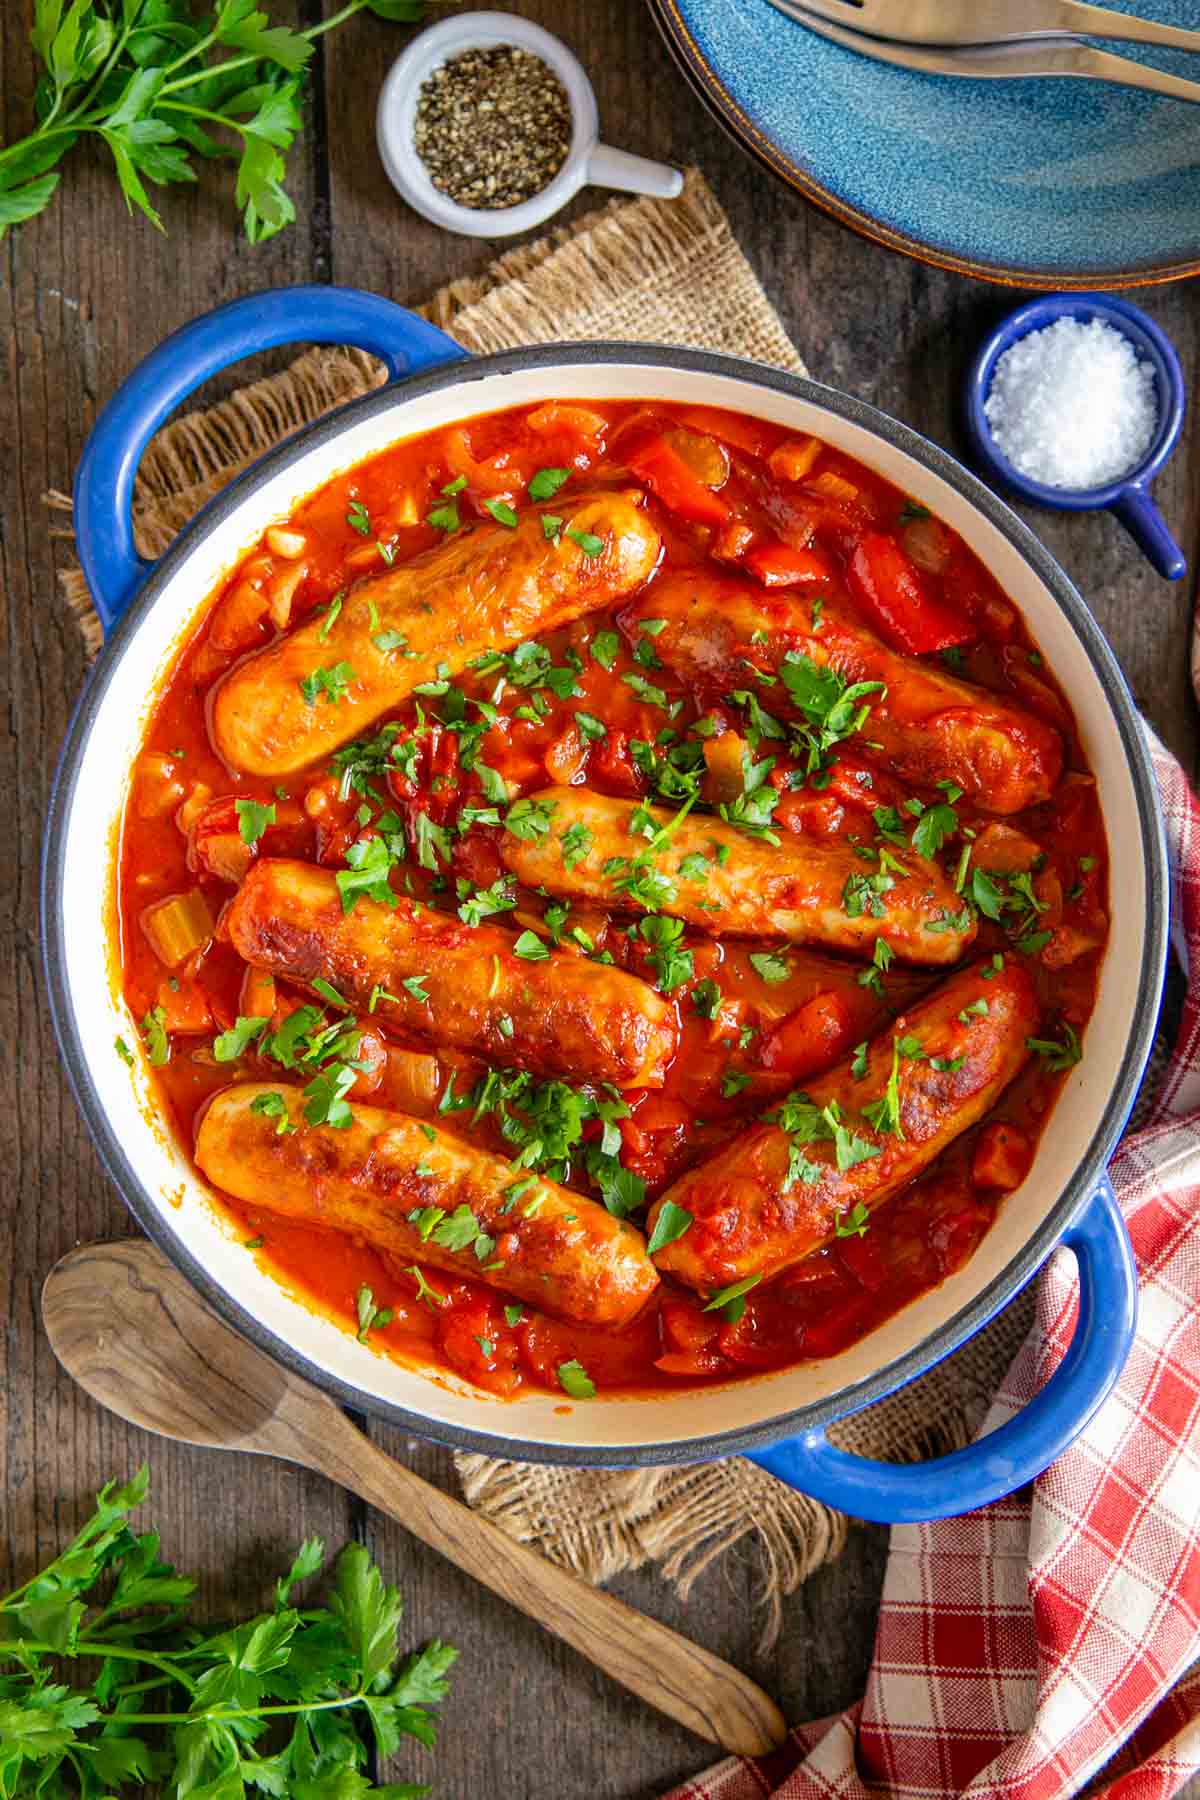 Sausage casserole on the table ready to serve, shown from above.